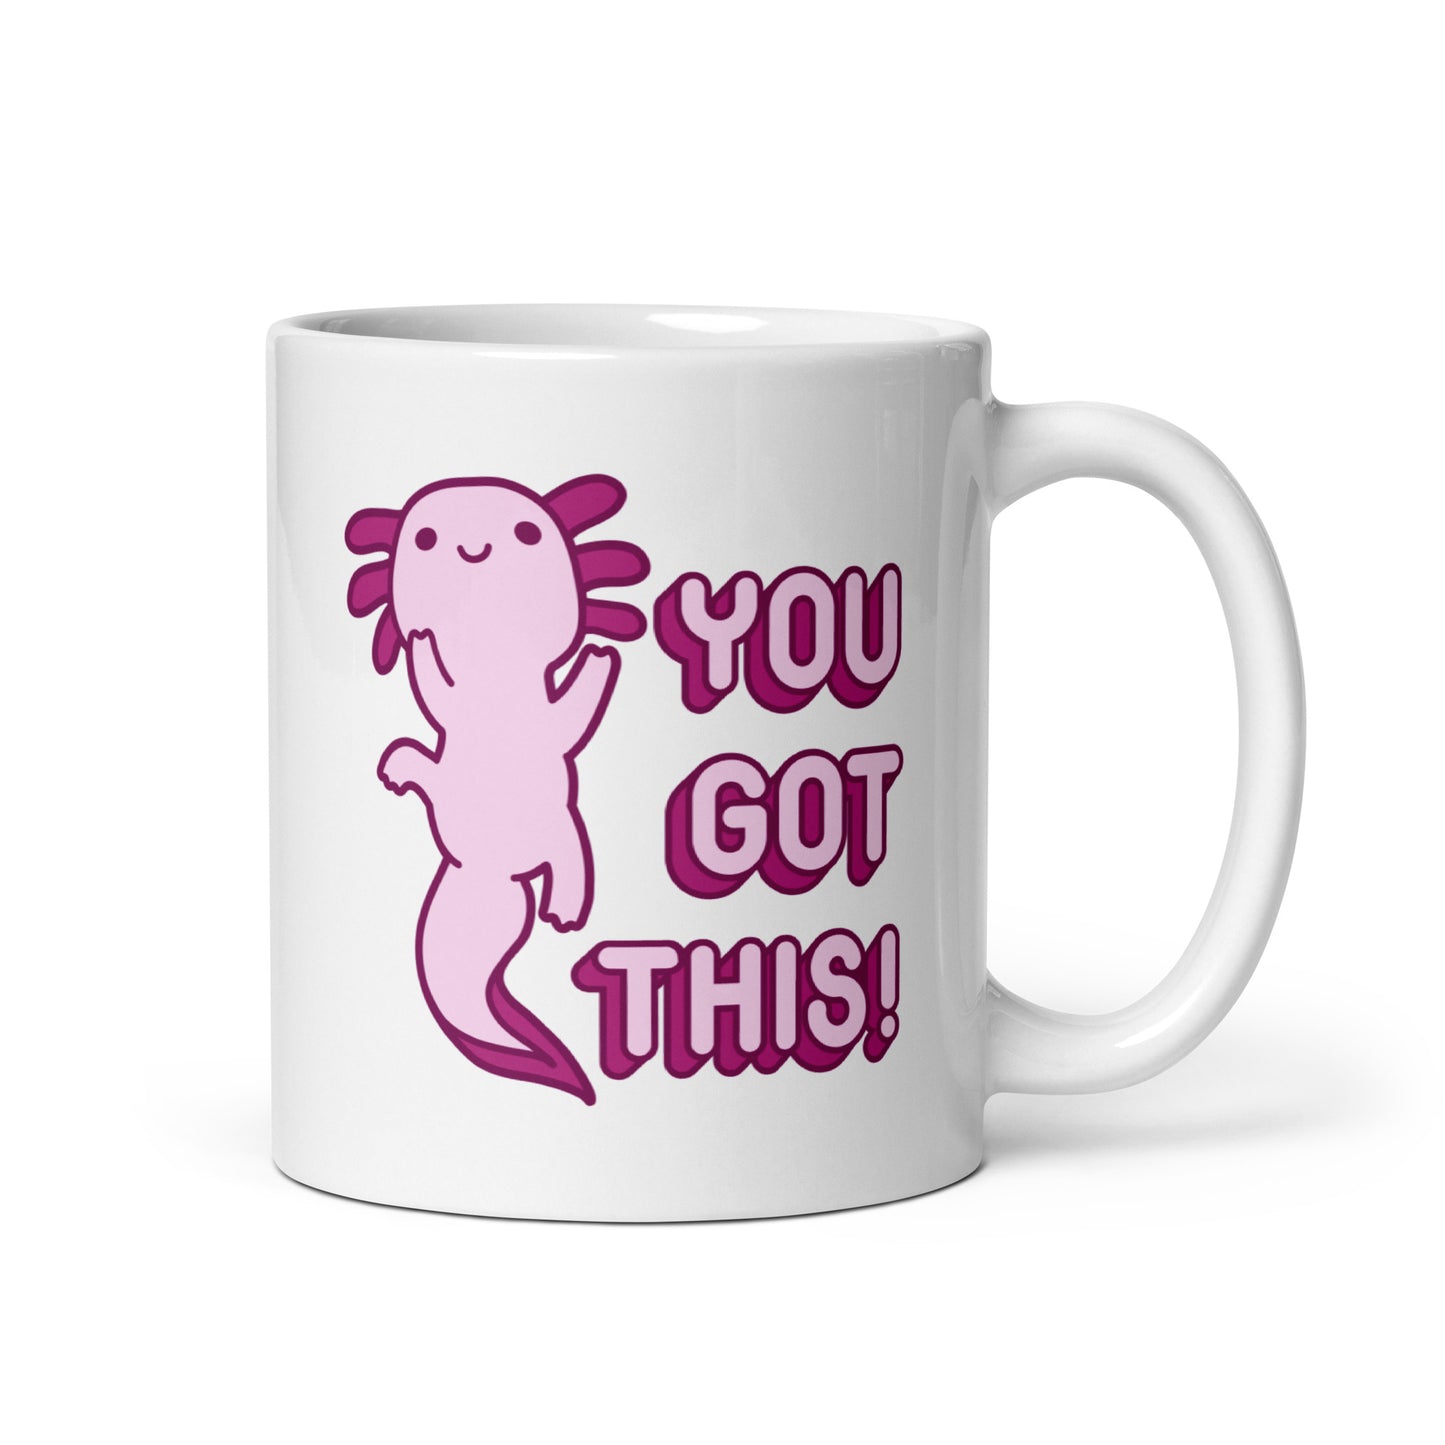 An 11oz white coffee mug with the handle on the right-hand side with a picture of a pink axolotl and the words "You Got This!" in pink bubble letters